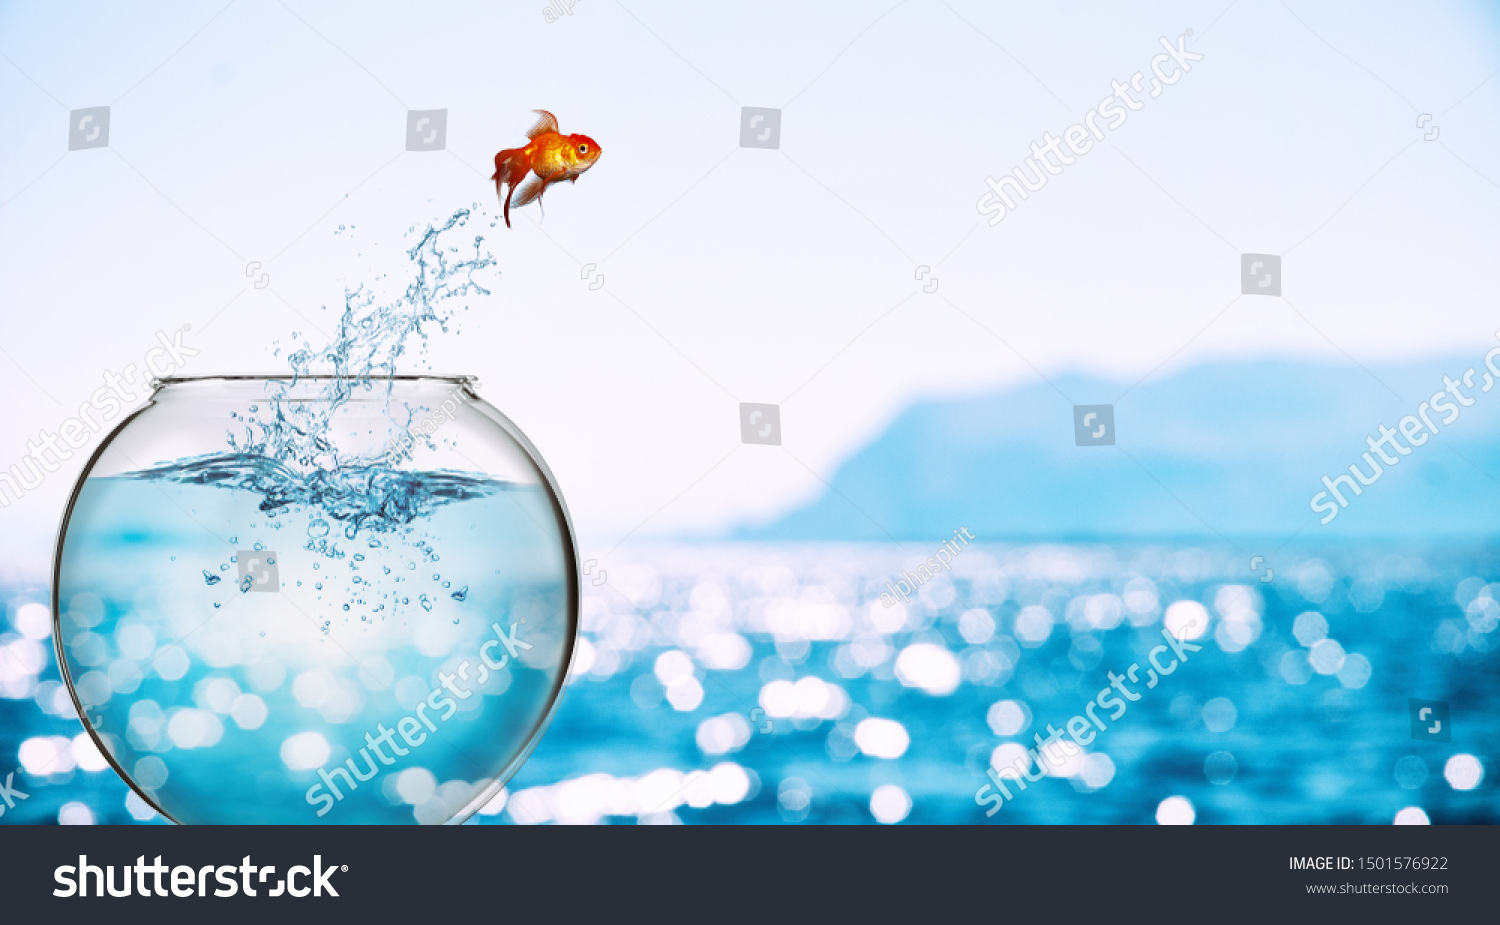 Goldfish leaps out of the aquarium to throw itself into the sea #1501576922